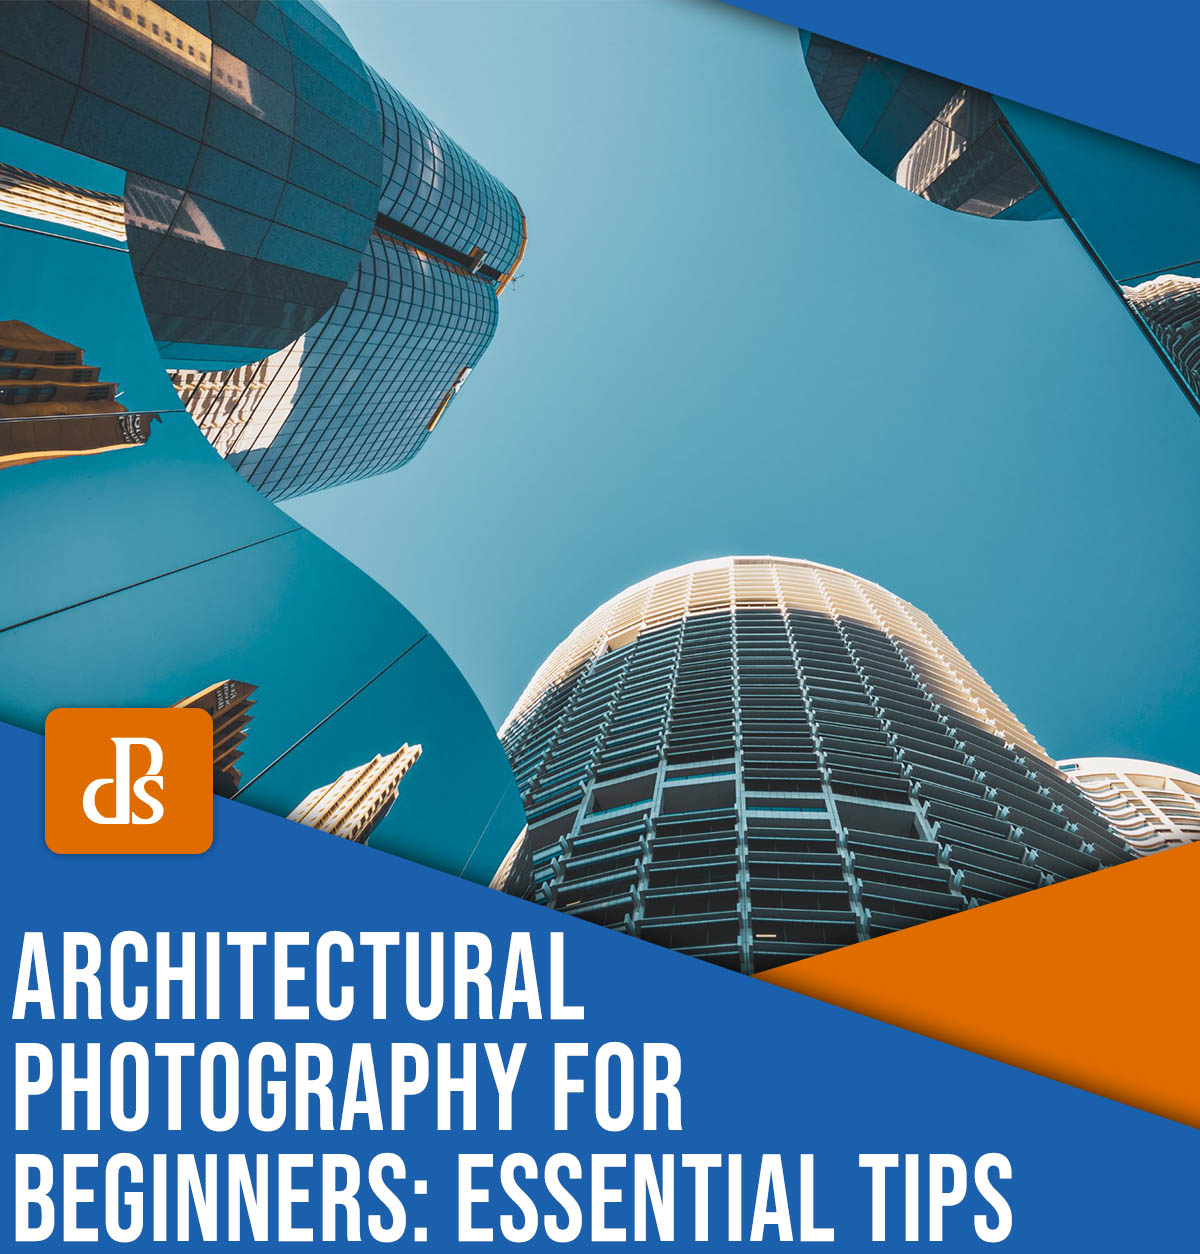 Architectural photography for beginners: essential tips